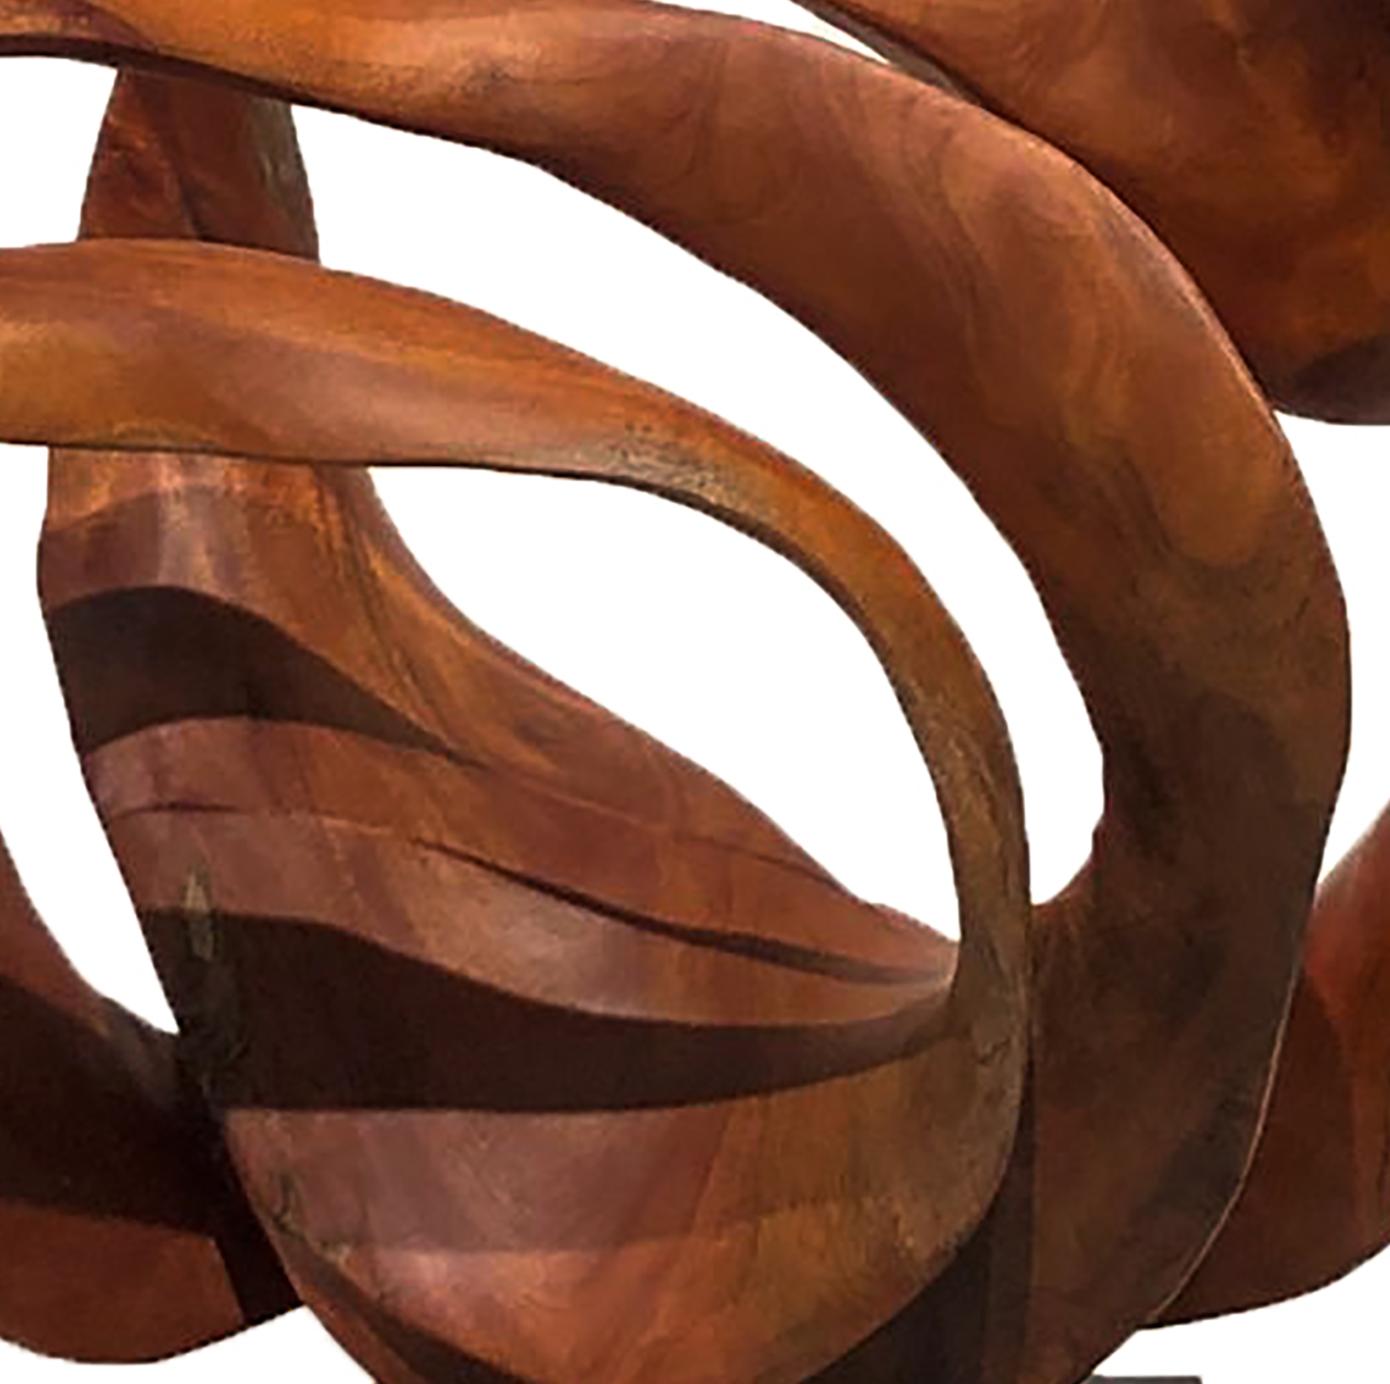 Equilibri - 21st Century, Contemporary, Abstract Sculpture, Mahogany Wood, Root 4